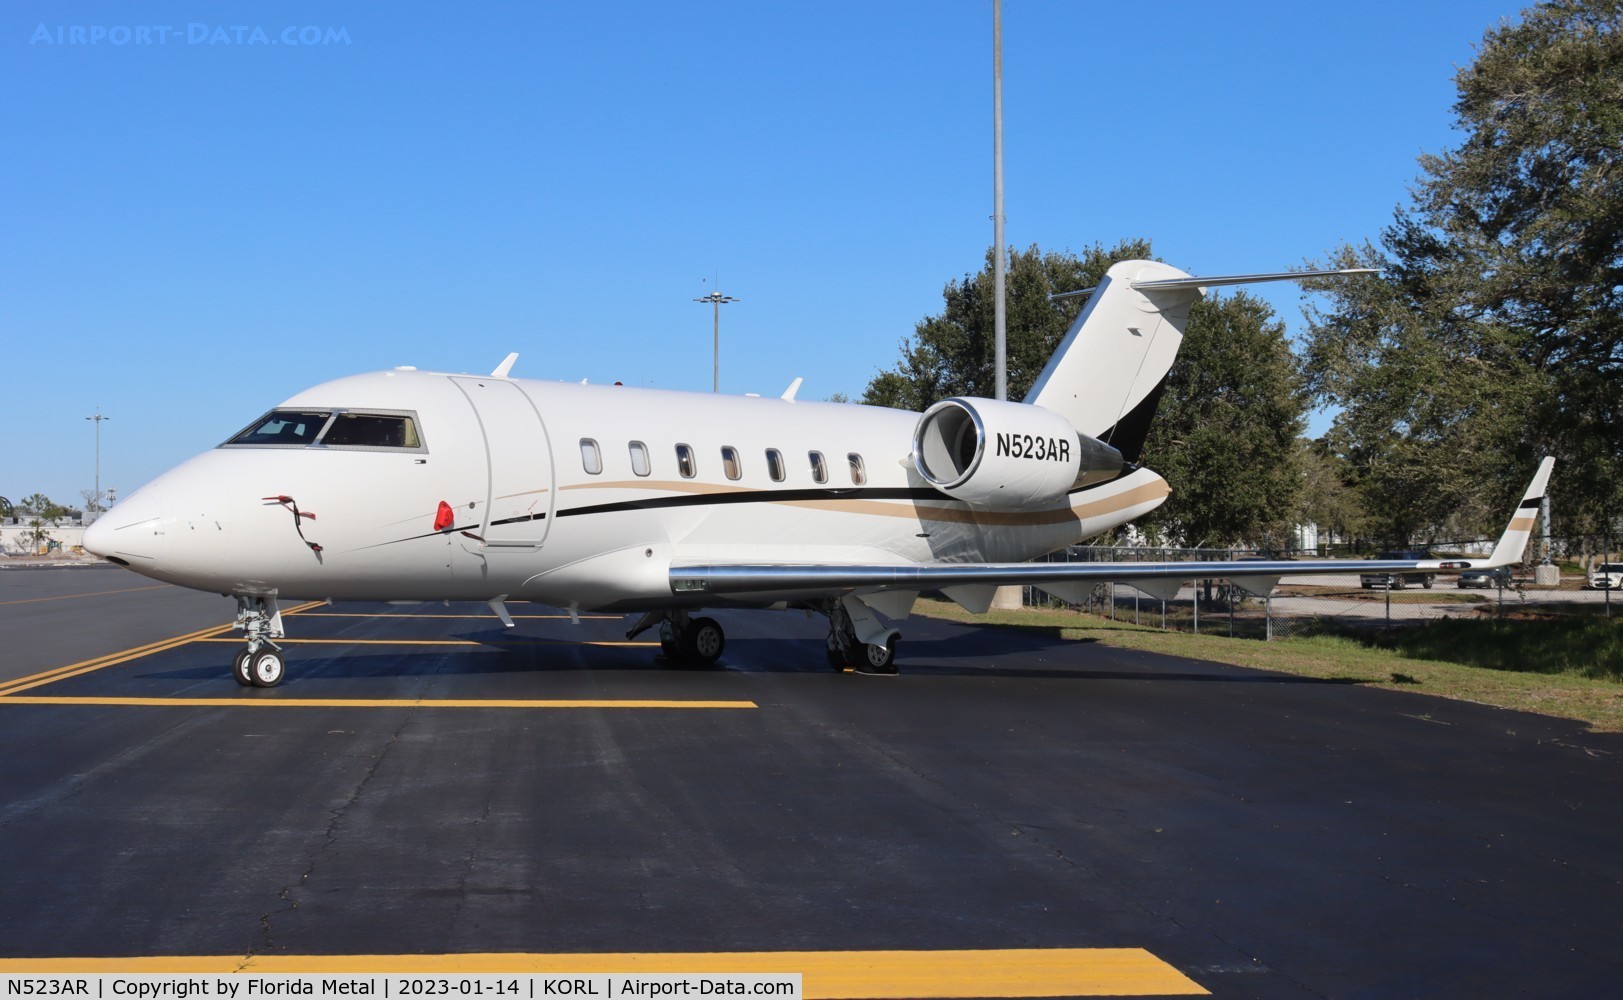 N523AR, 2009 Bombardier Challenger 605 (CL-600-2B16) C/N 5839, Challenger 605 zx